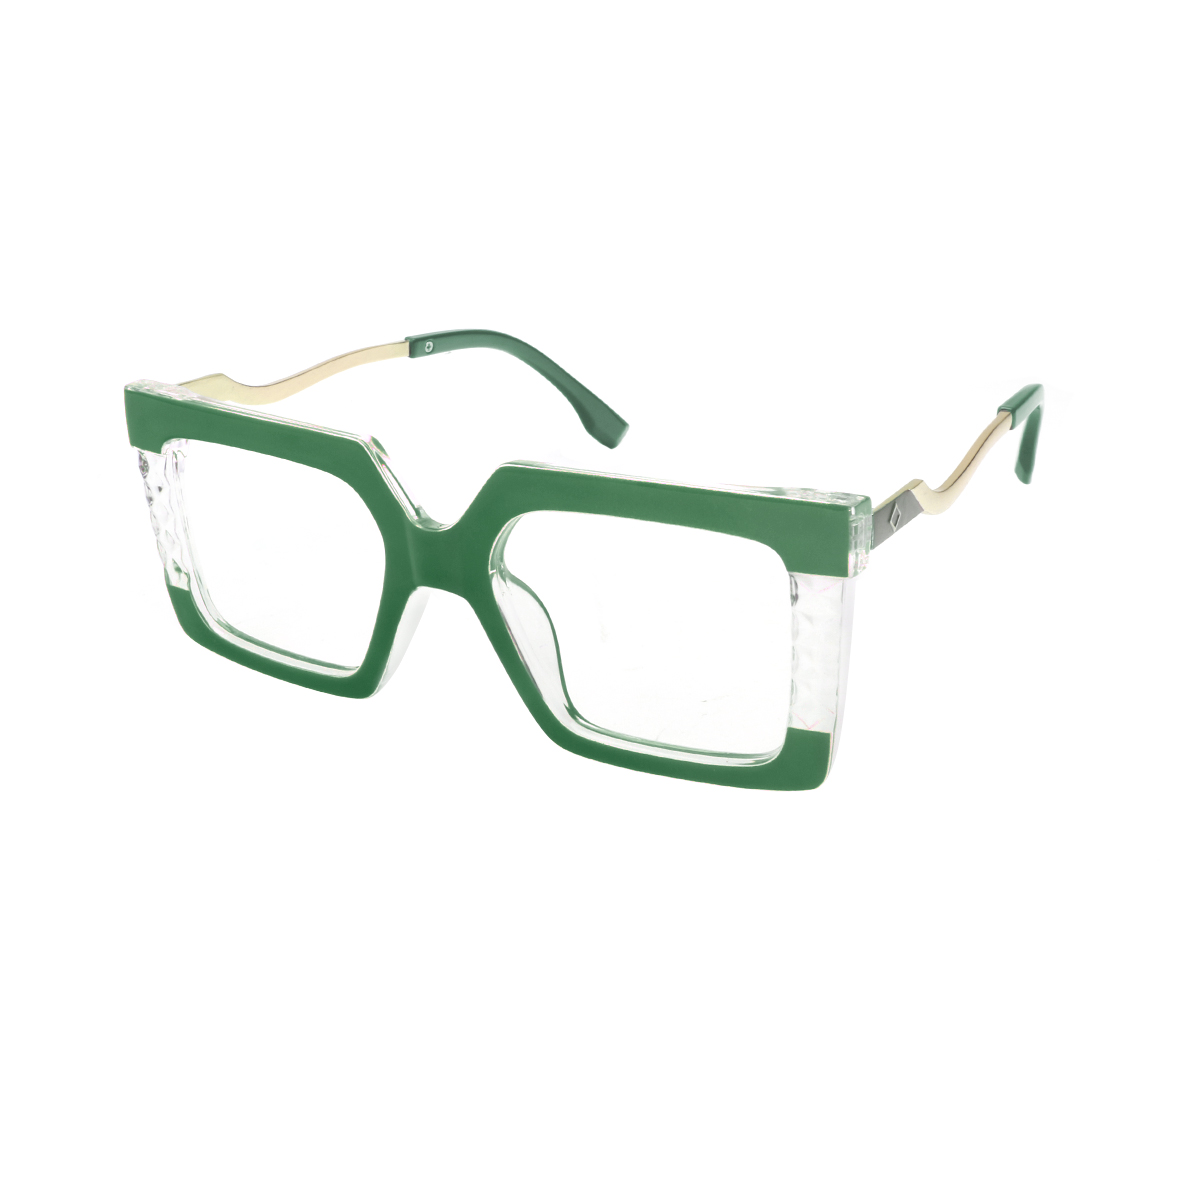 Sicyon - Square Green Reading Glasses for Women